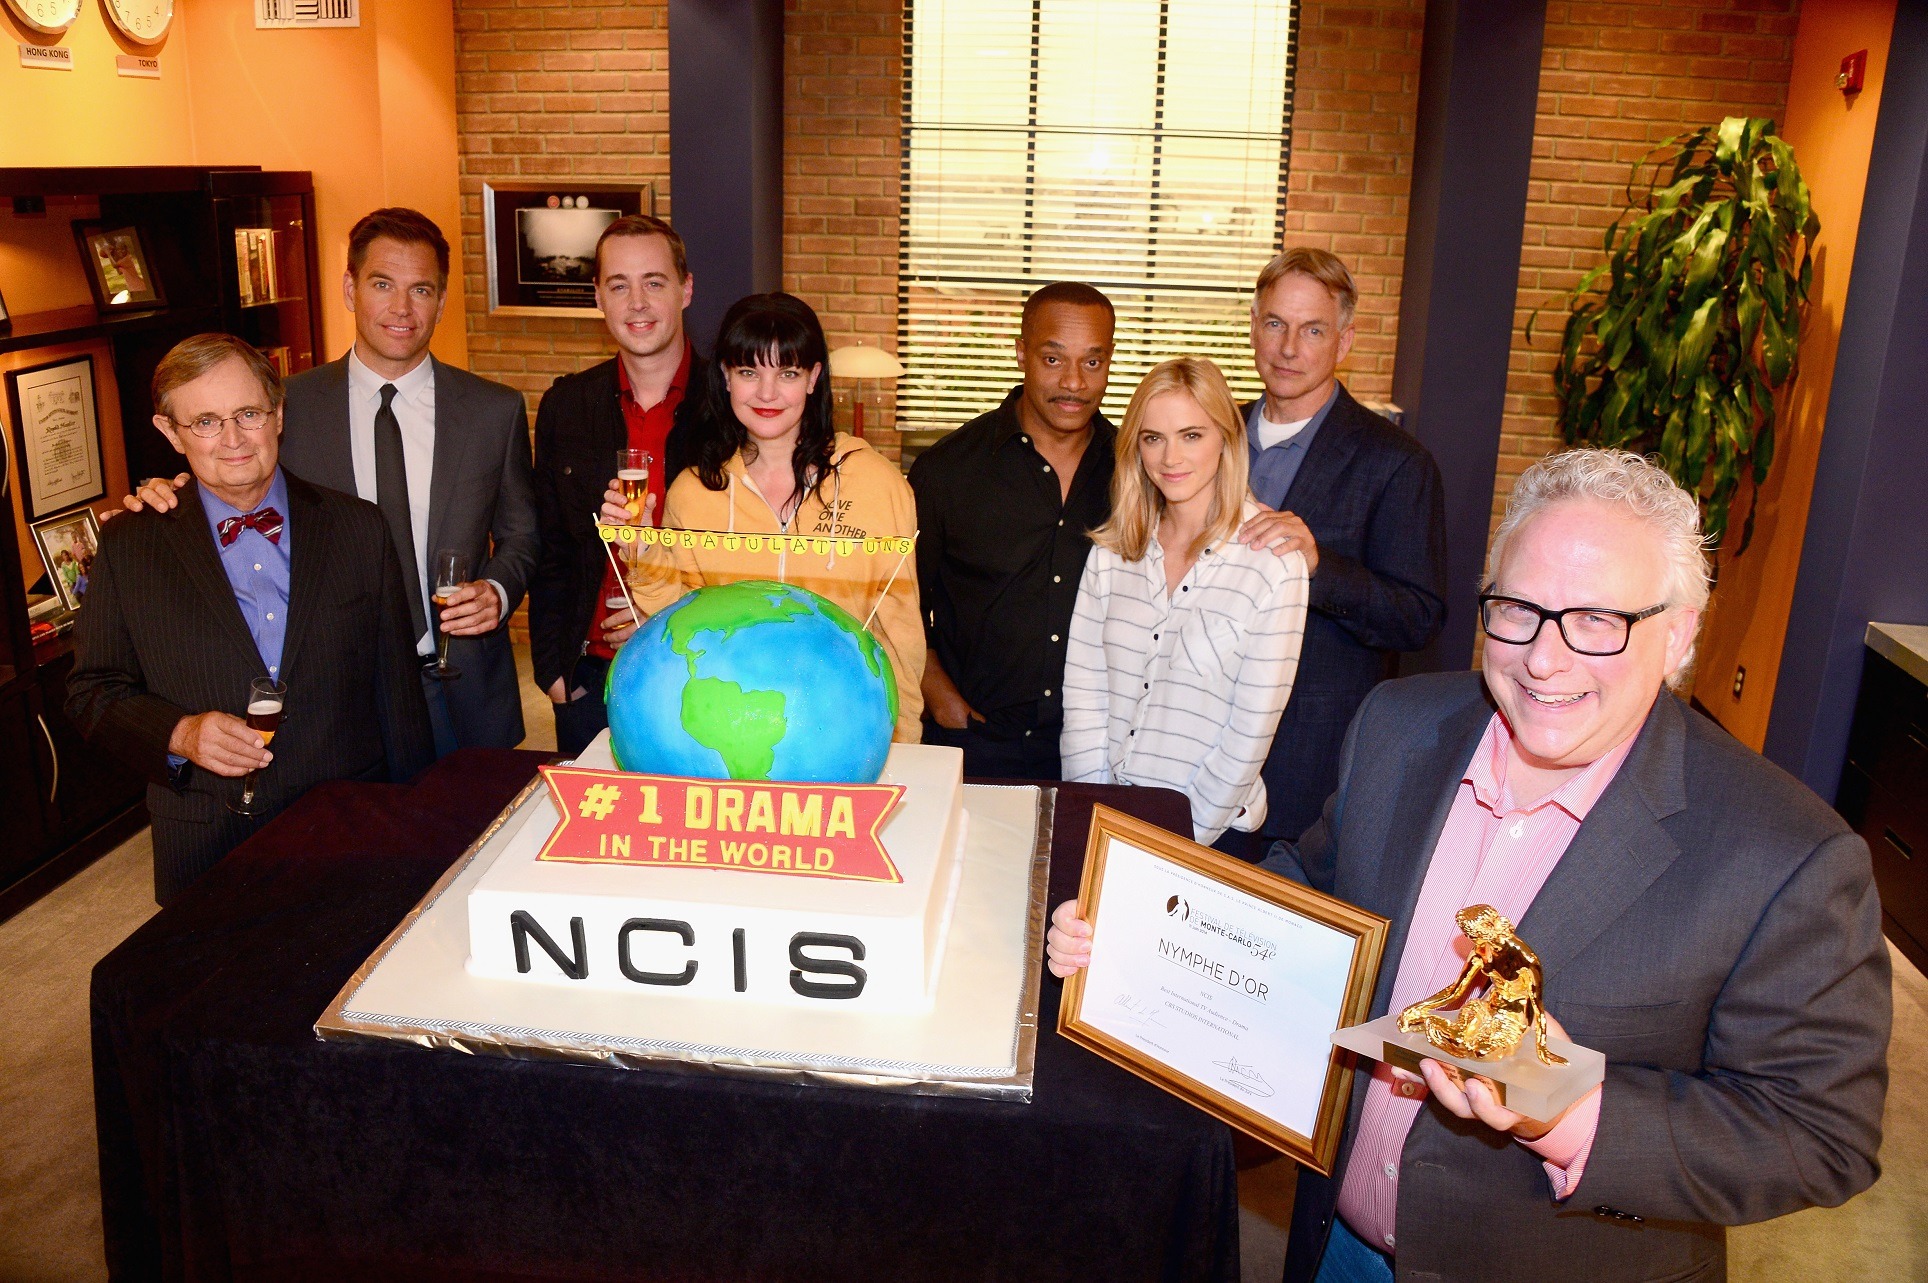 Rocky Carrool (fourth from right) and the cast of NCIS.